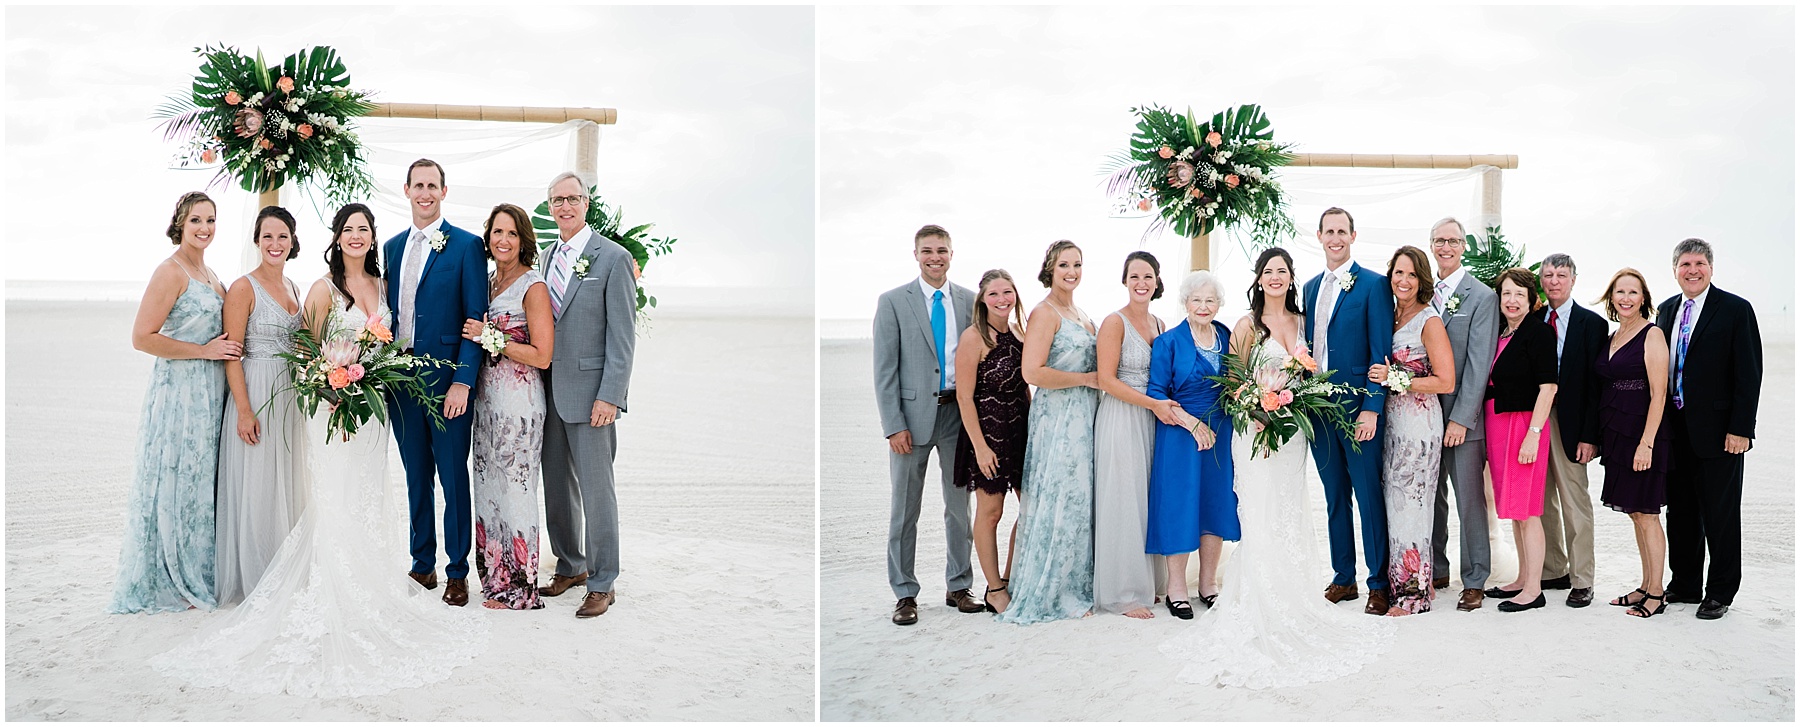 Family smiles on wedding day at JW Marriott Marco Island in Florida